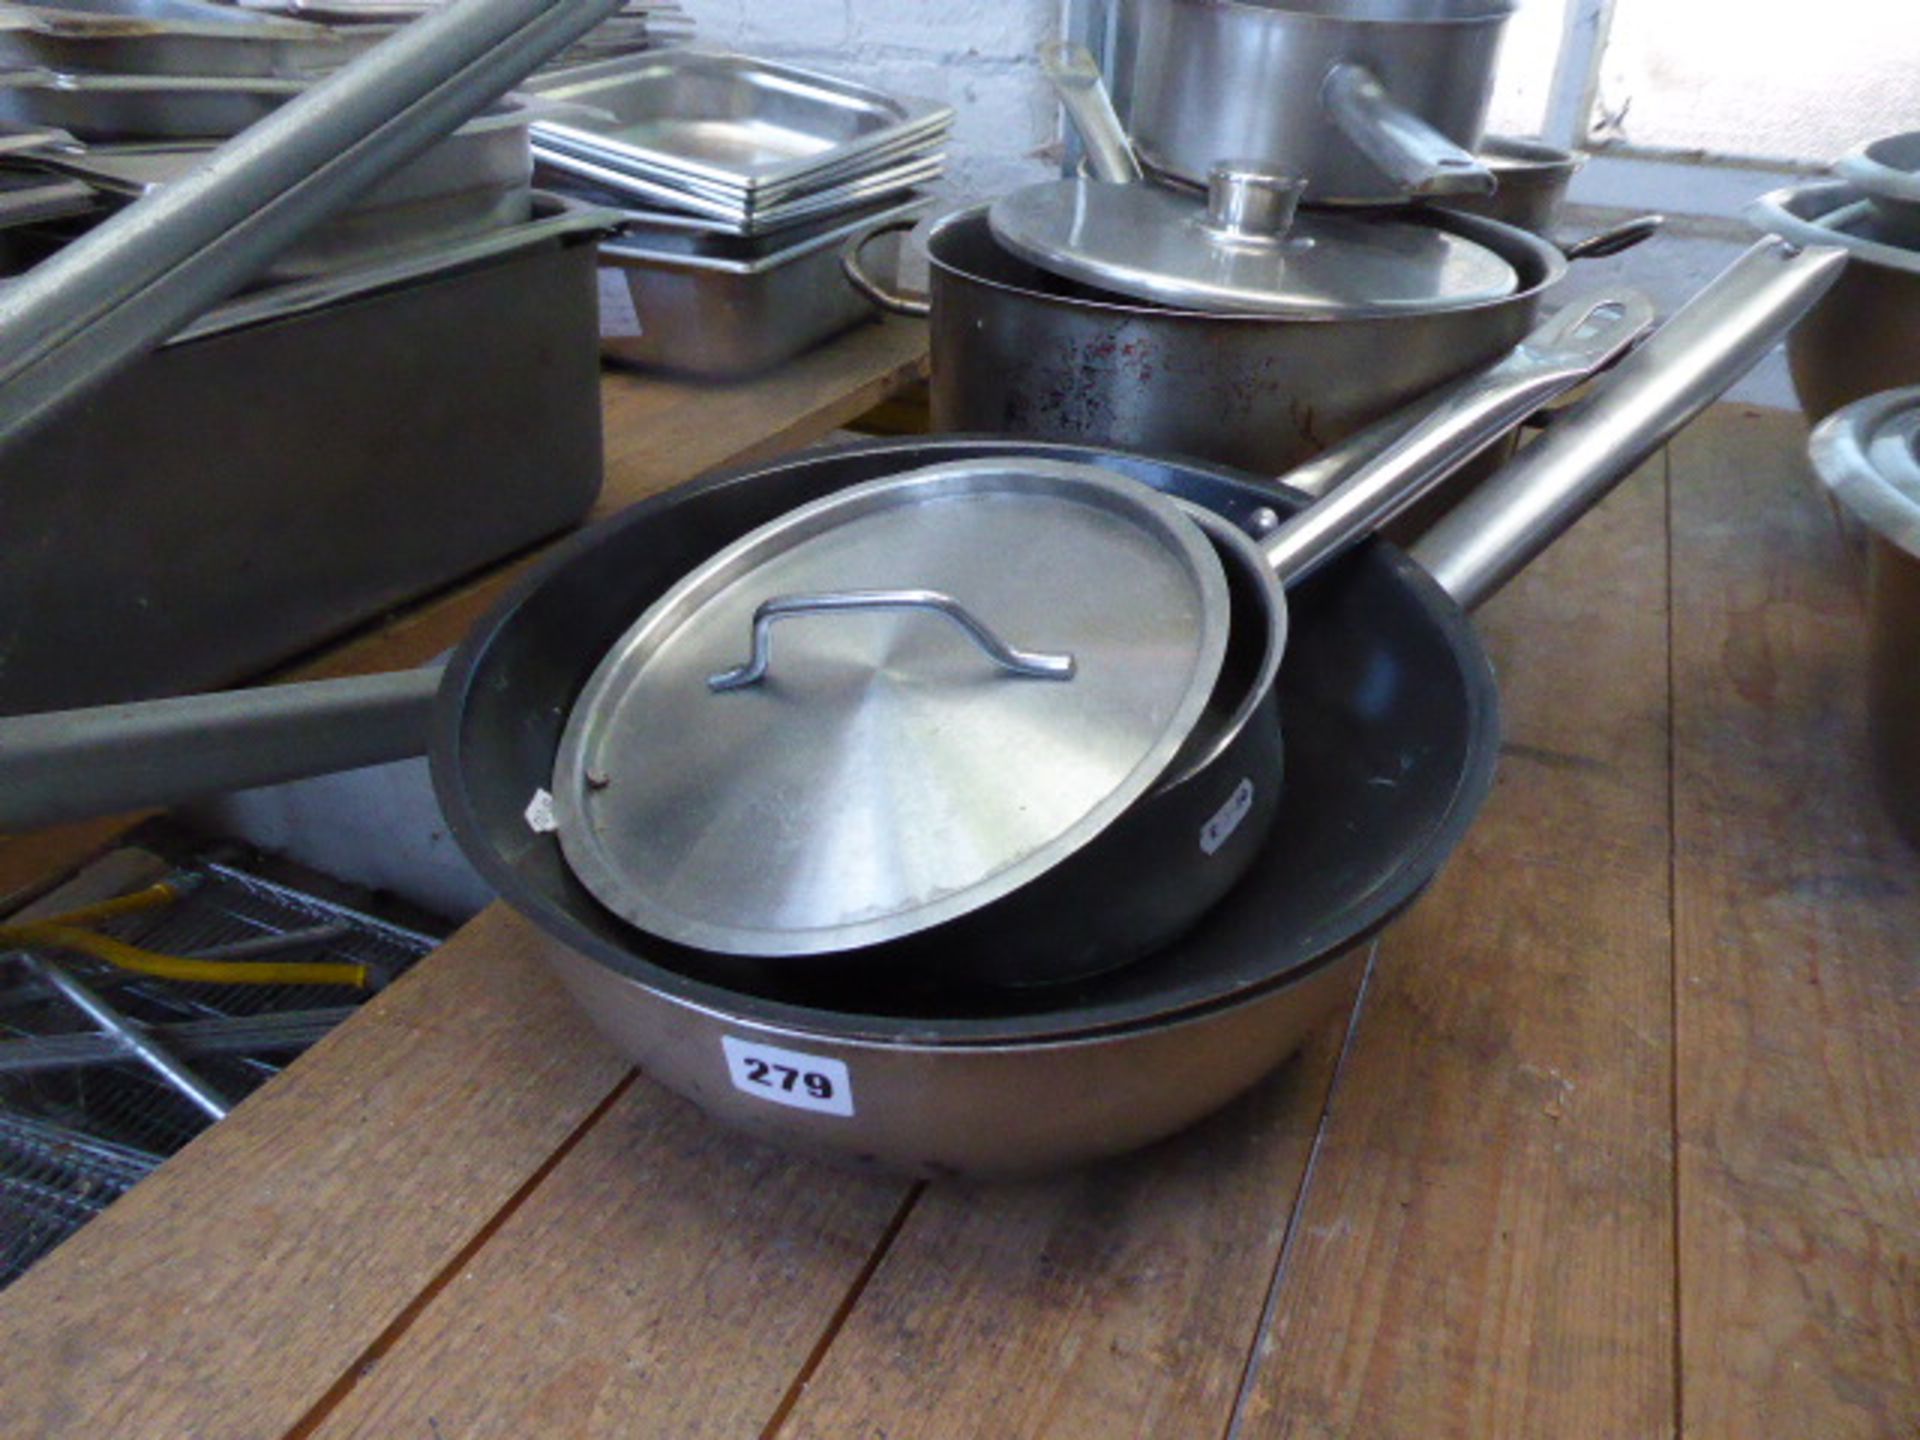 7 assorted stainless steel and aluminium cooking pots, some with lids